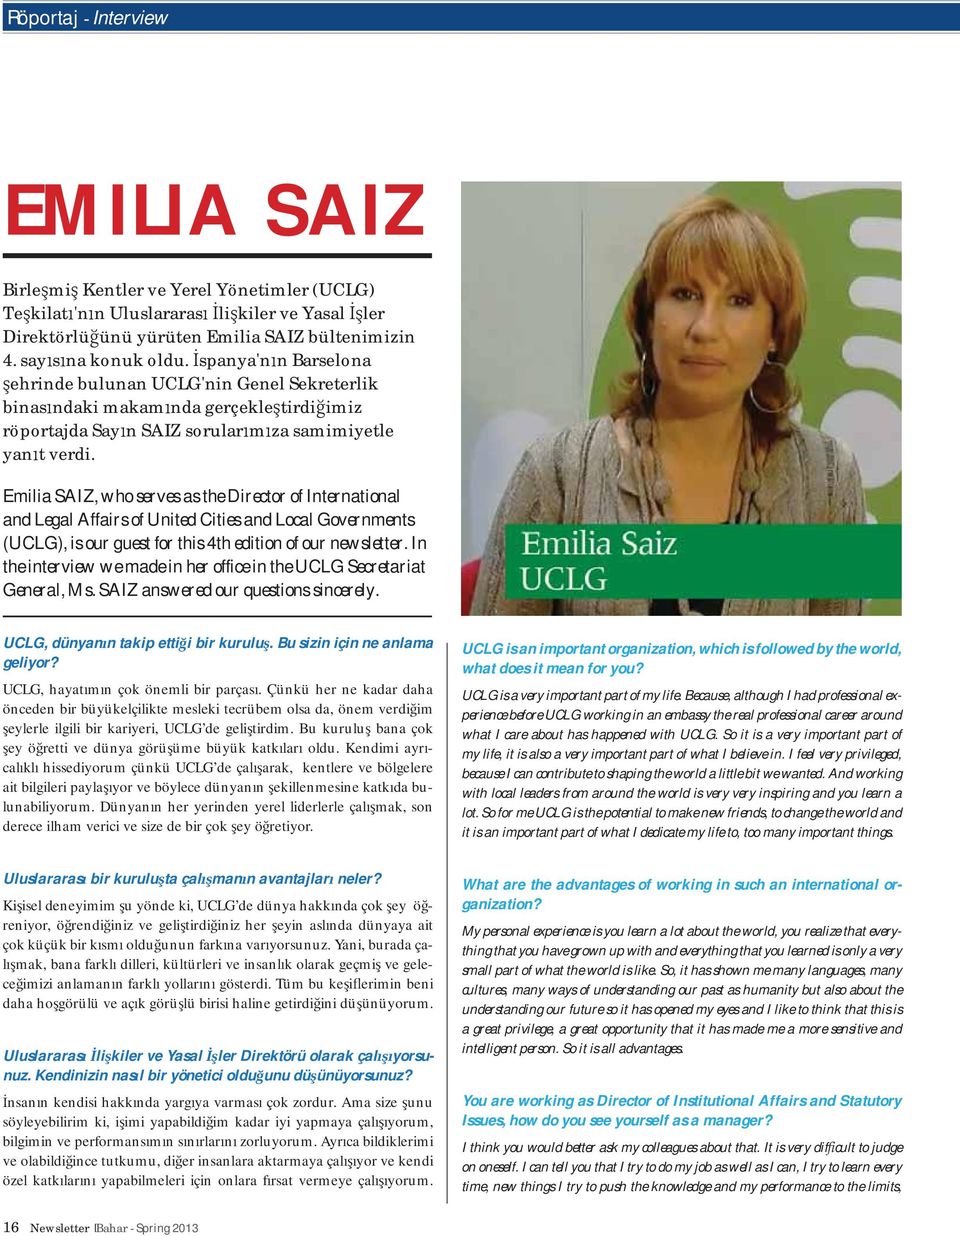 Emilia SAIZ, who serves as the Director of International and Legal Affairs of United Cities and Local Governments (UCLG), is our guest for this 4th edition of our newsletter.